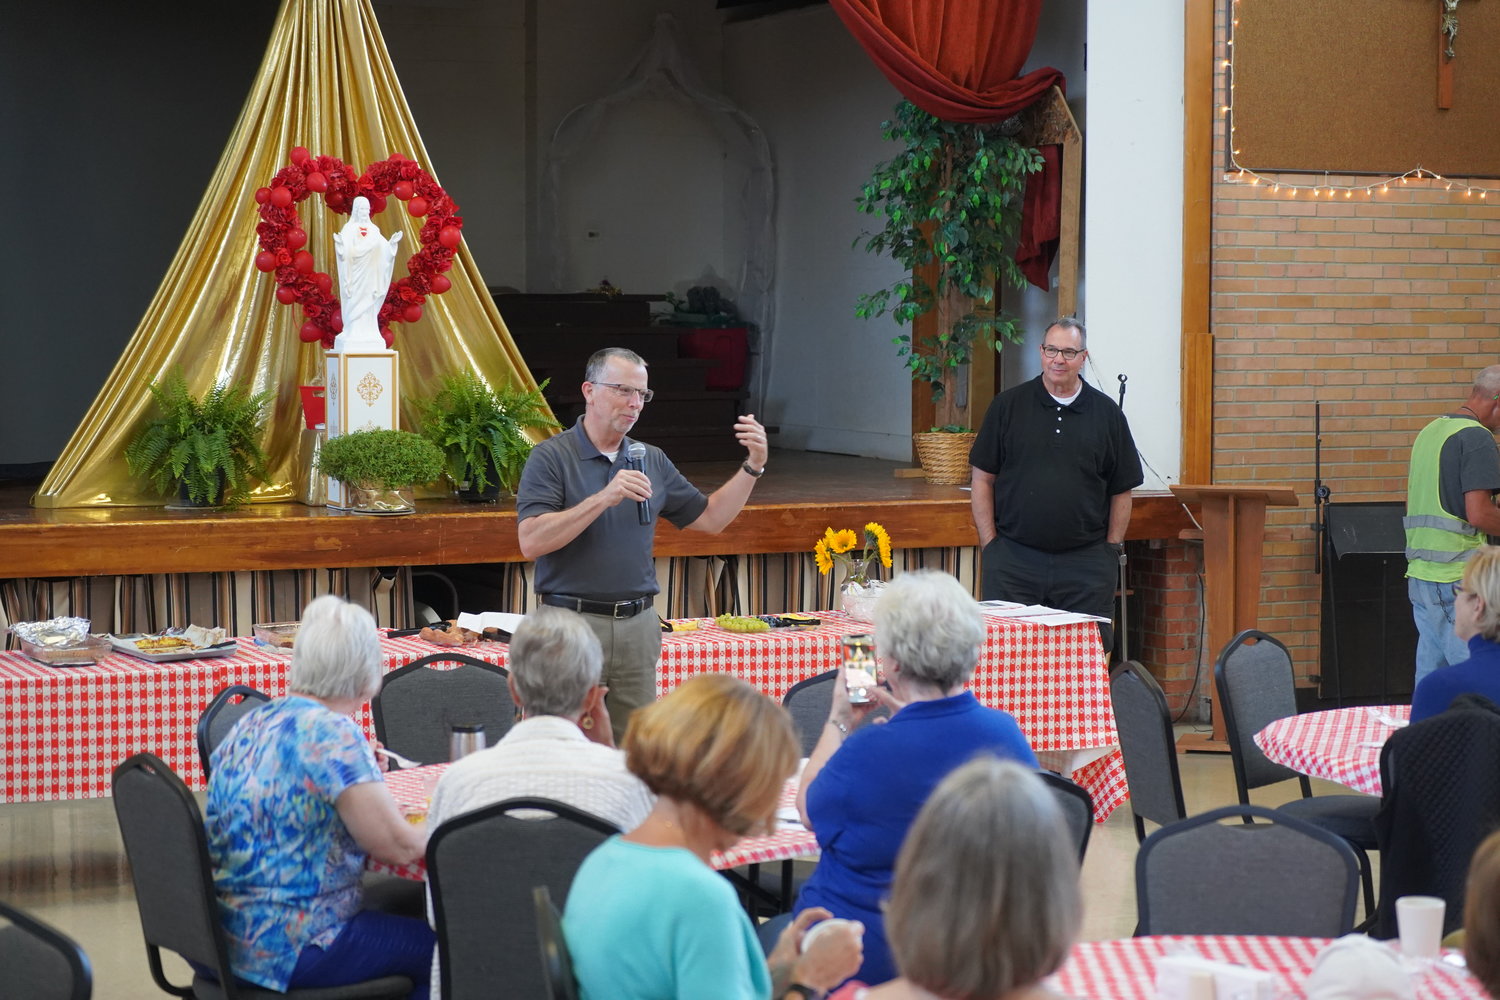 Tom Turner, former executive director and administrator of the Bishop Sullivan Center in Kansas City, leads the discussion, while Monsignor Gregory L. Higley, pastor, looks on.